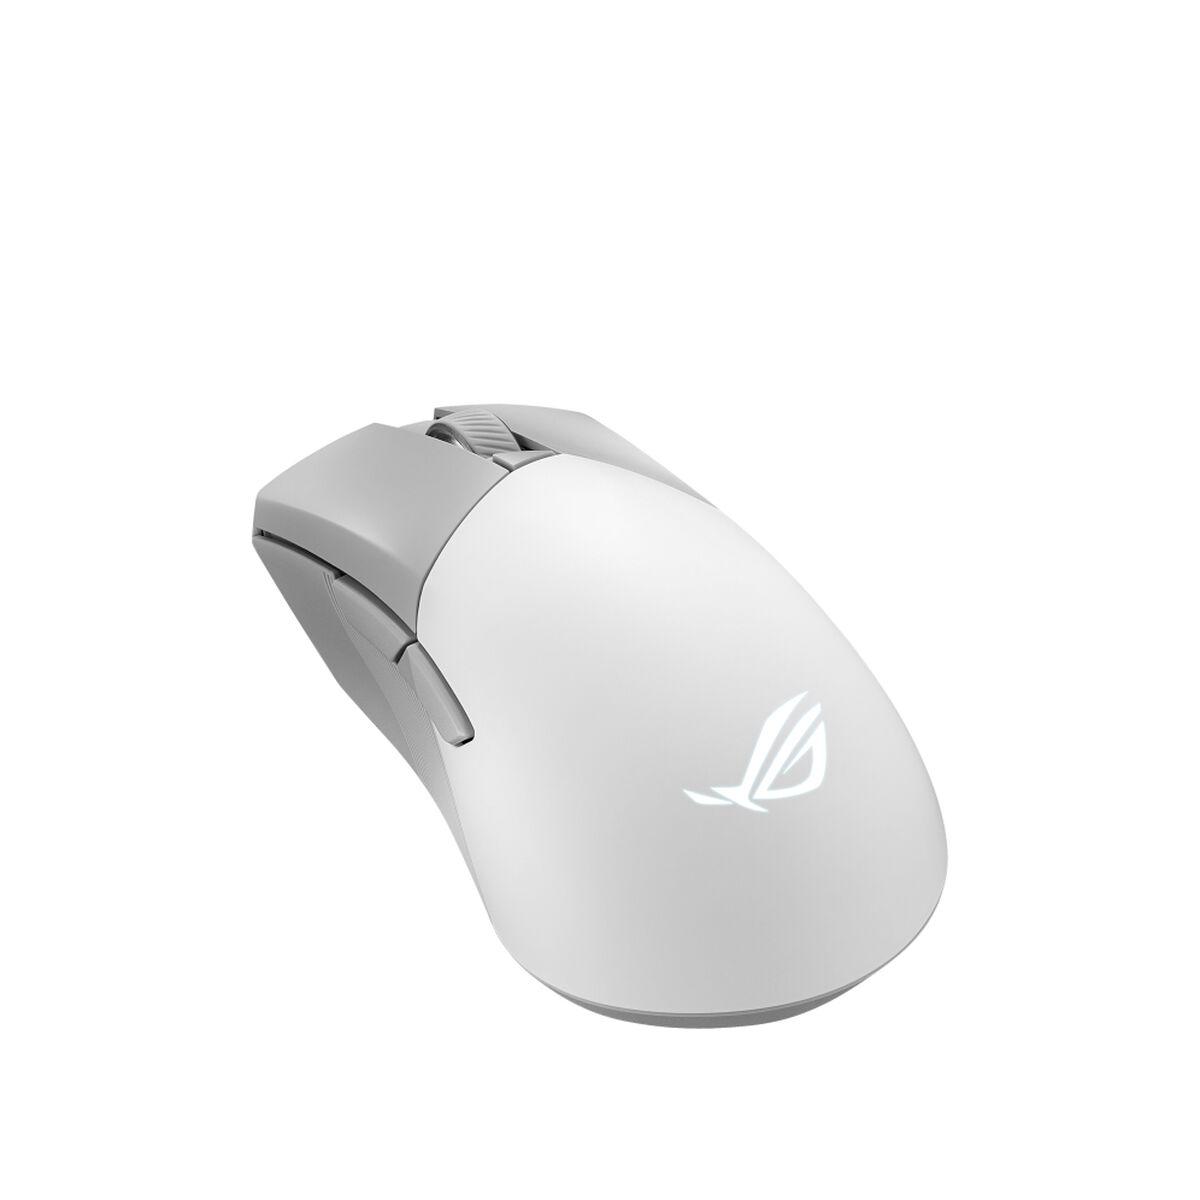 Se ASUS ROG Gladius III Wireless AimPoint Moonligth White Gaming Mouse hos Boligcenter.dk